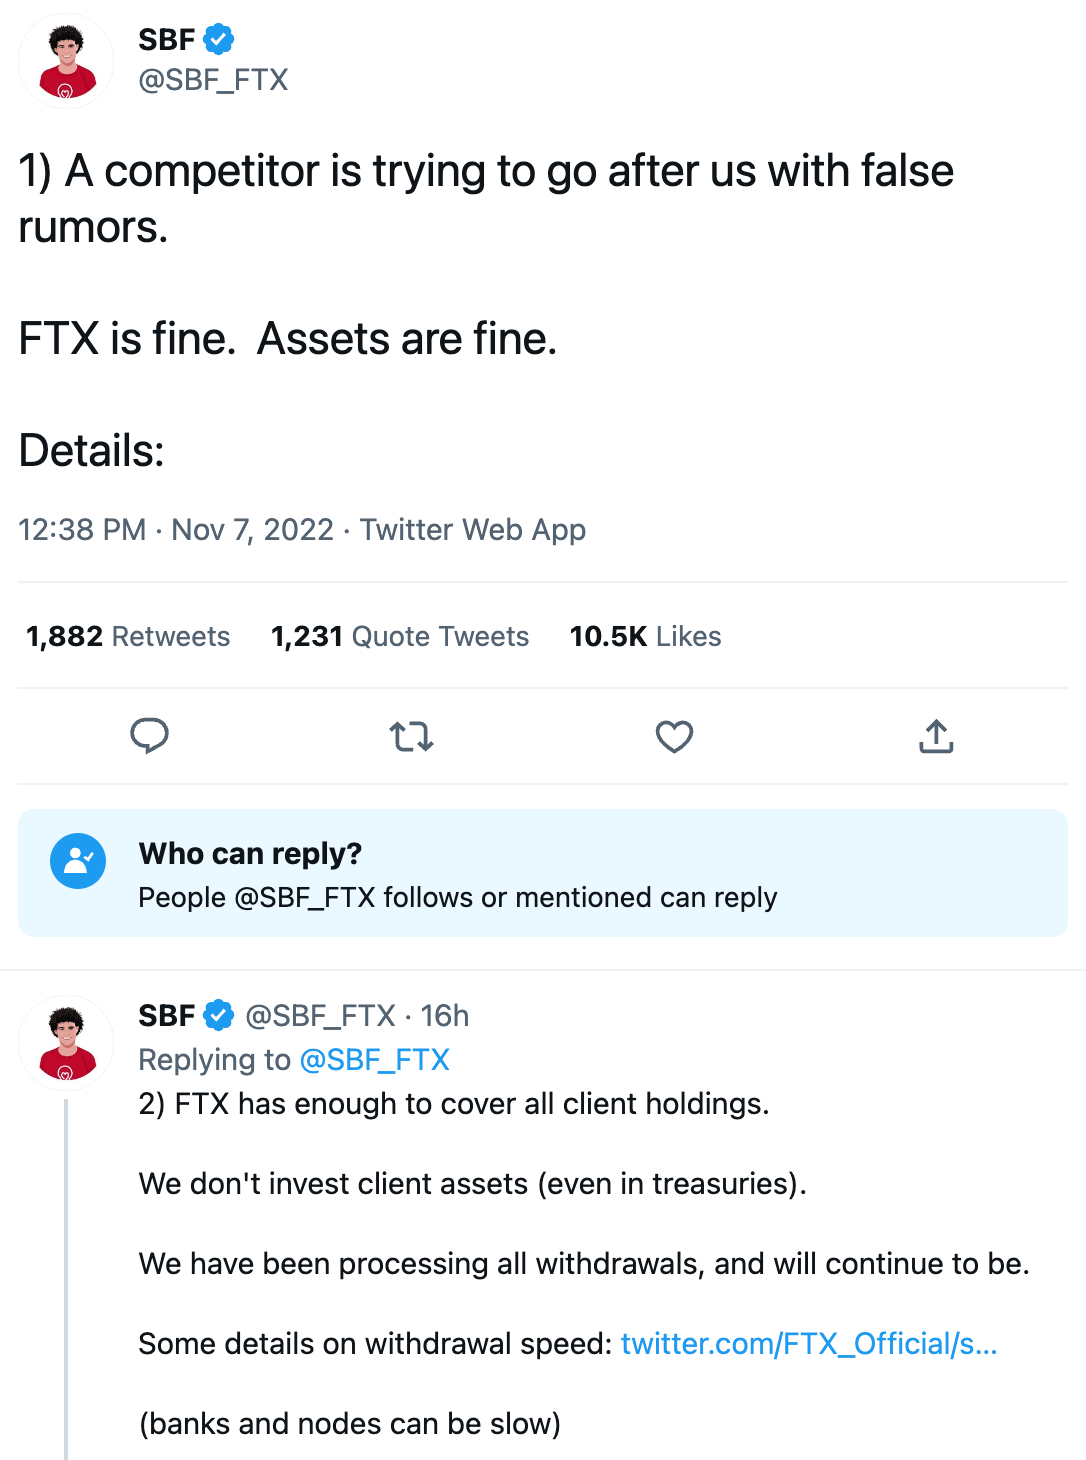 Two tweets by SBF: 1) A competitor is trying to go after us with false rumors.  FTX is fine.  Assets are fine.  Details:  2) FTX has enough to cover all client holdings.  We don't invest client assets (even in treasuries).  We have been processing all withdrawals, and will continue to be.  Some details on withdrawal speed: https://twitter.com/FTX_Official/status/1589510760107216896  (banks and nodes can be slow)